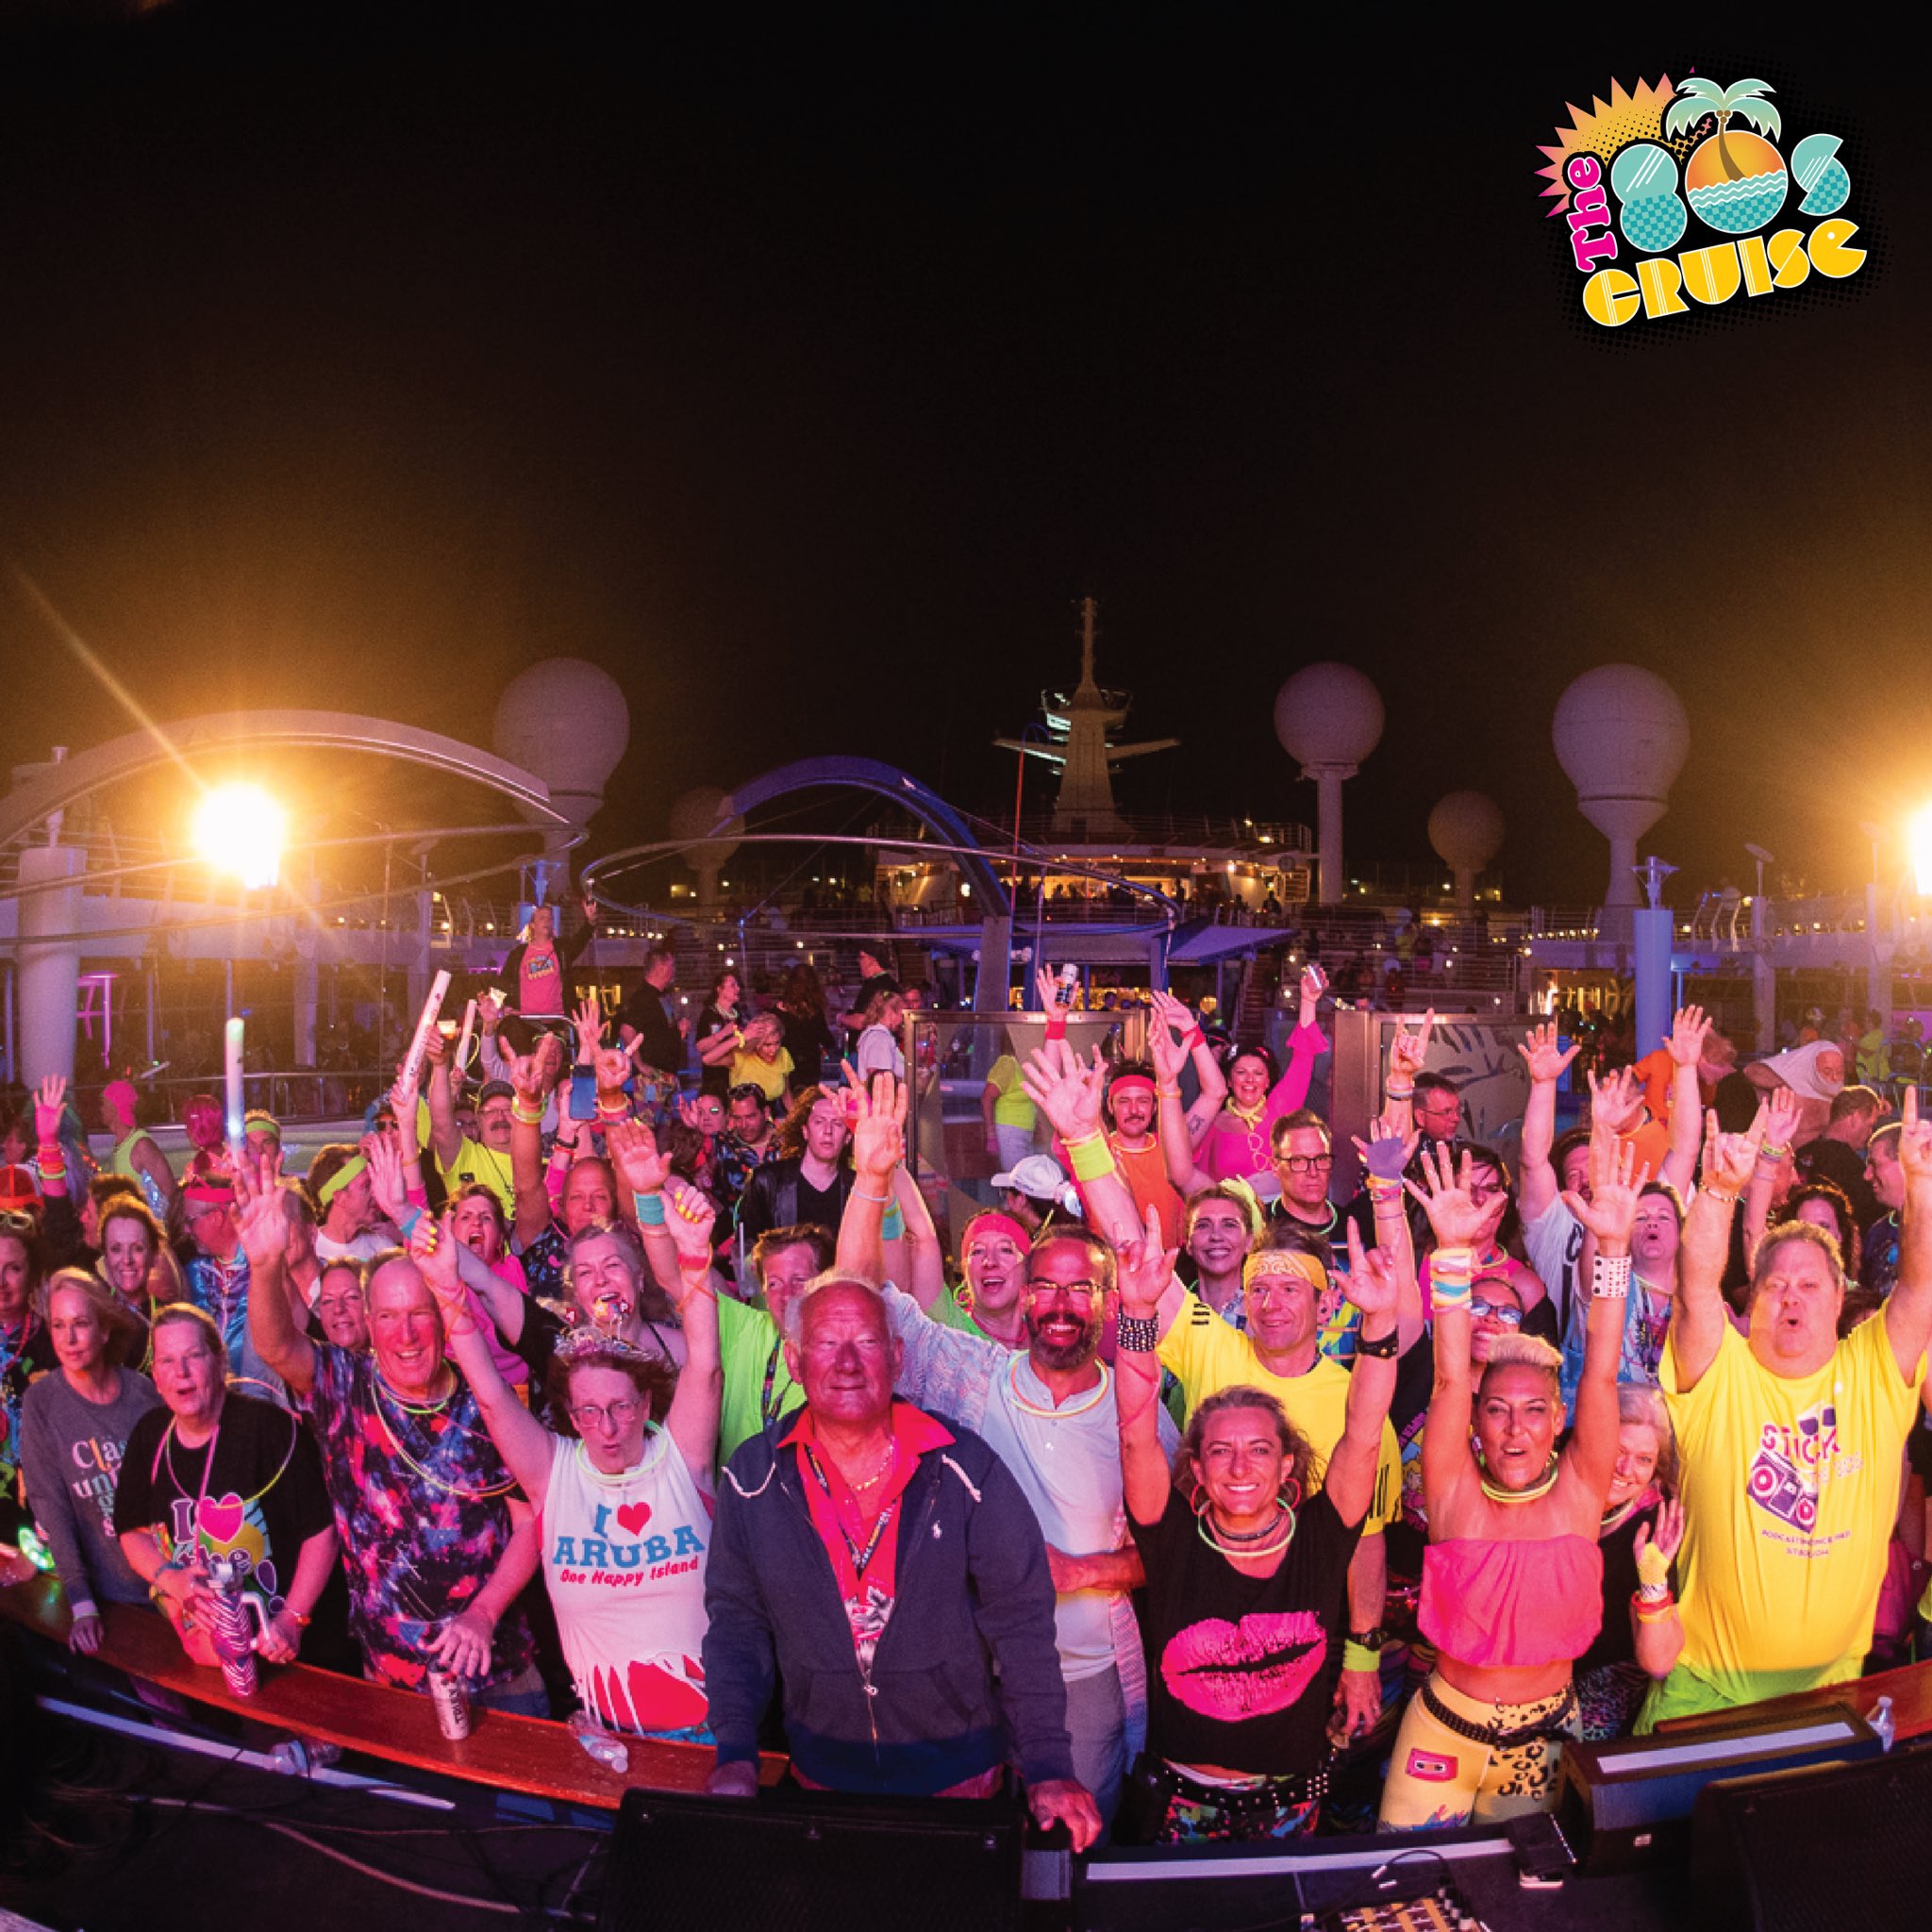 It's an Ultimate 80s Party! Who's ready to dance the night away onboard The  80s Cruise? #onlyonthe80scruise